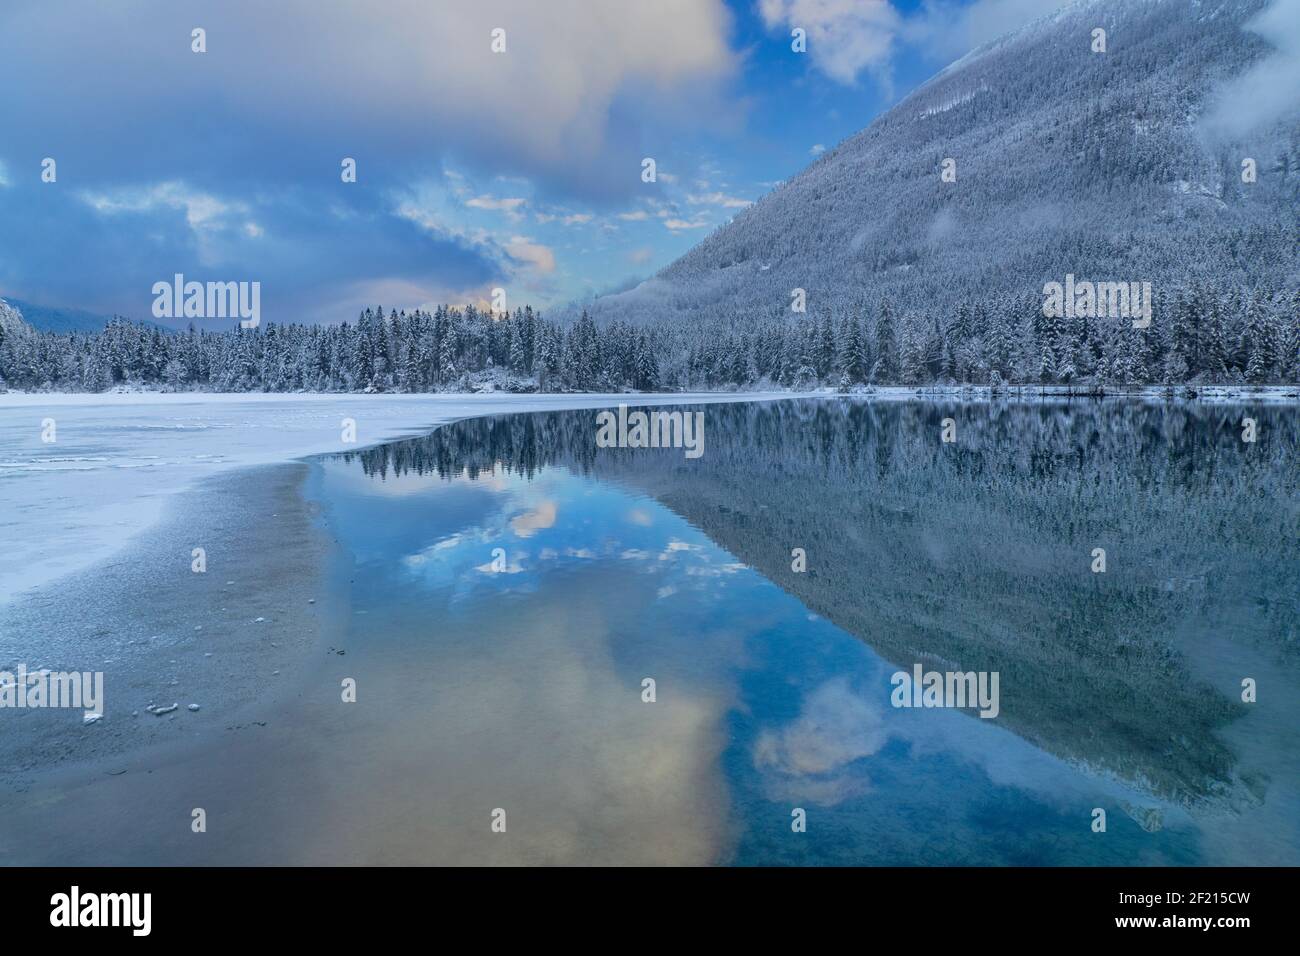 Germany, Bavaria, Berchtesgaden, Berchtesgadener Alps, Partially snow covered and frozen Lake Hintersee with reflection of sky, hillside and clouds in the unfrozen section. Stock Photo